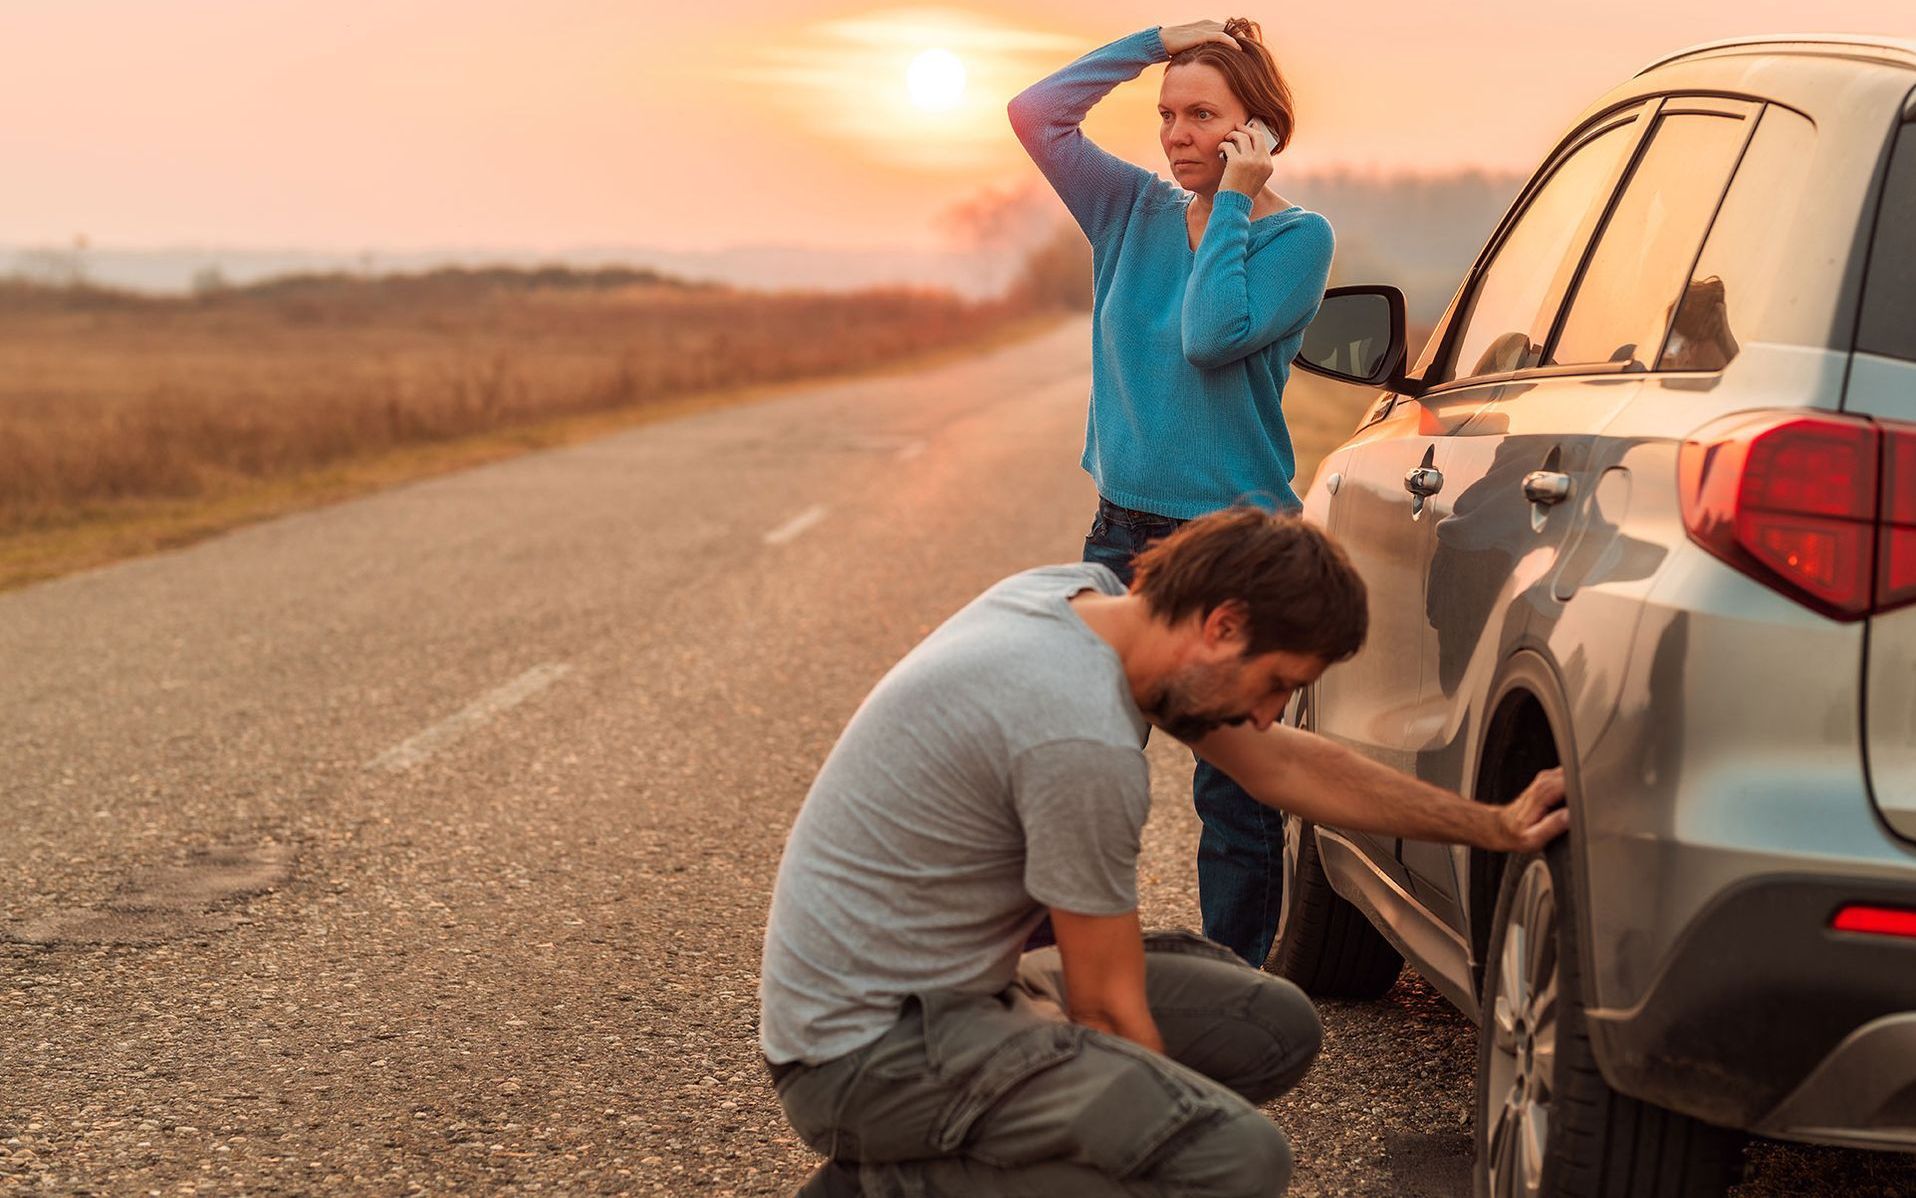 a man is changing a tire on a car while a woman talks on a cell phone .